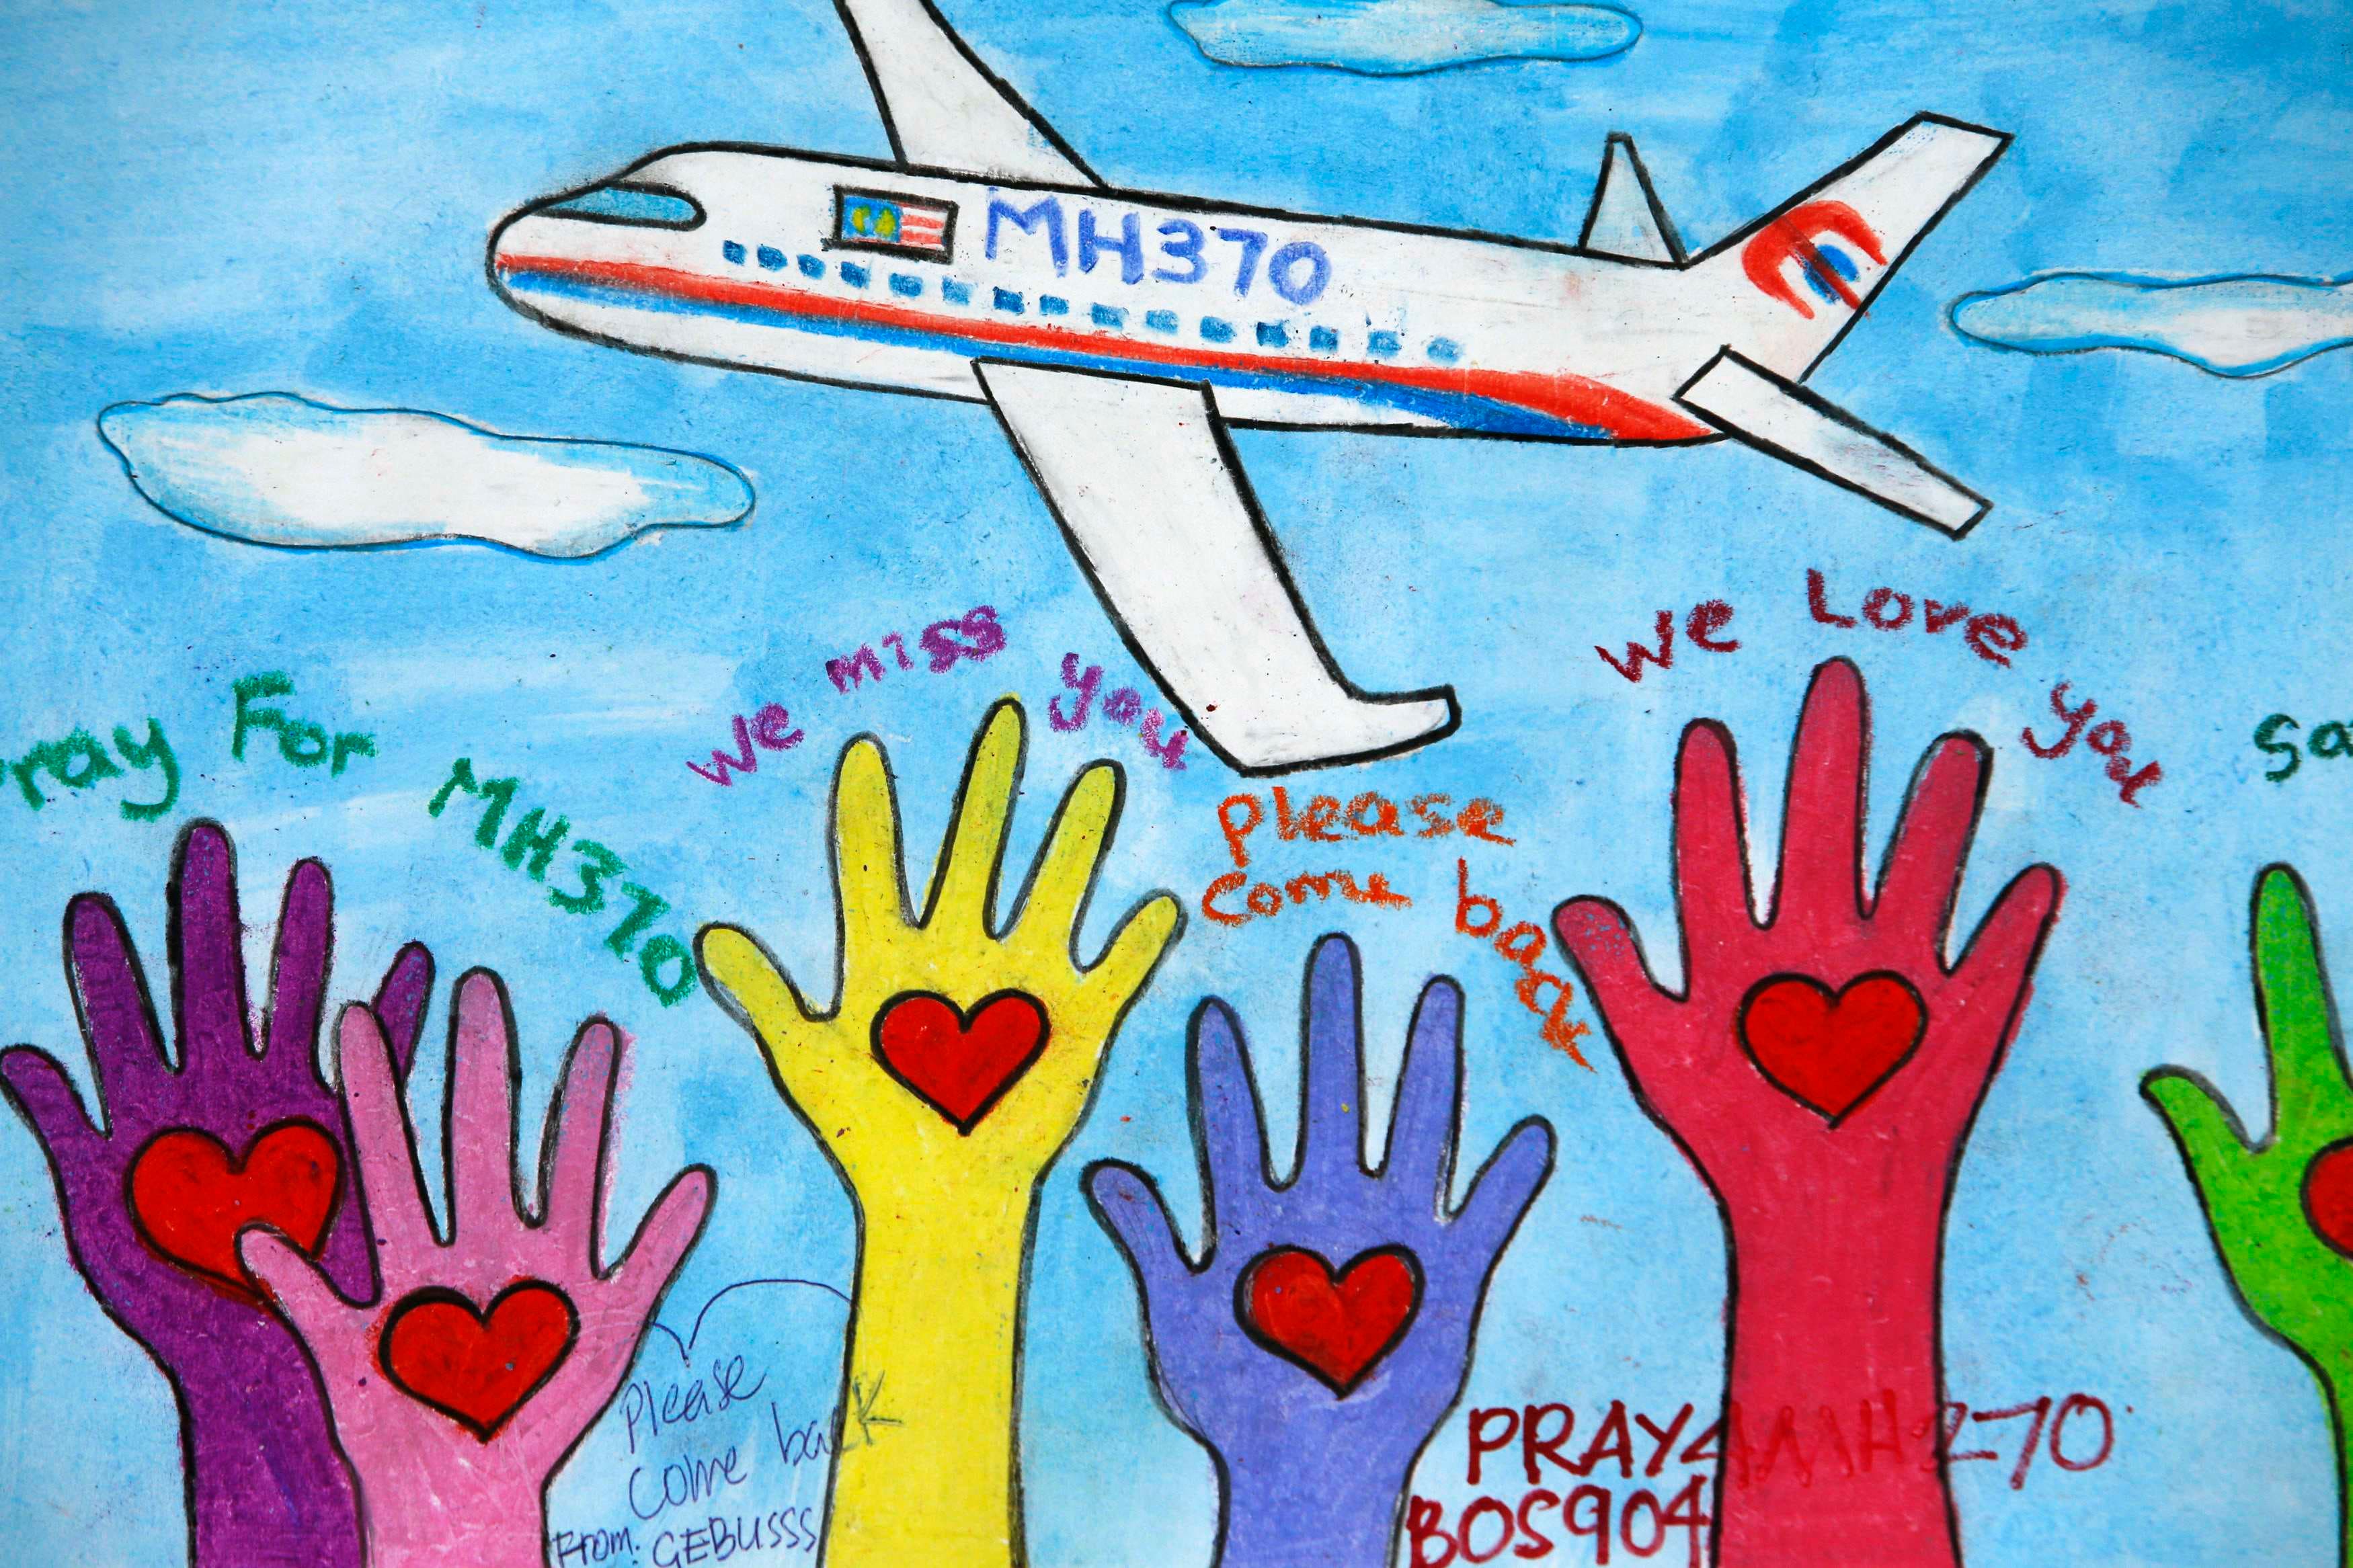 Well-wishes for the missing  Malaysia Airlines Flight MH370